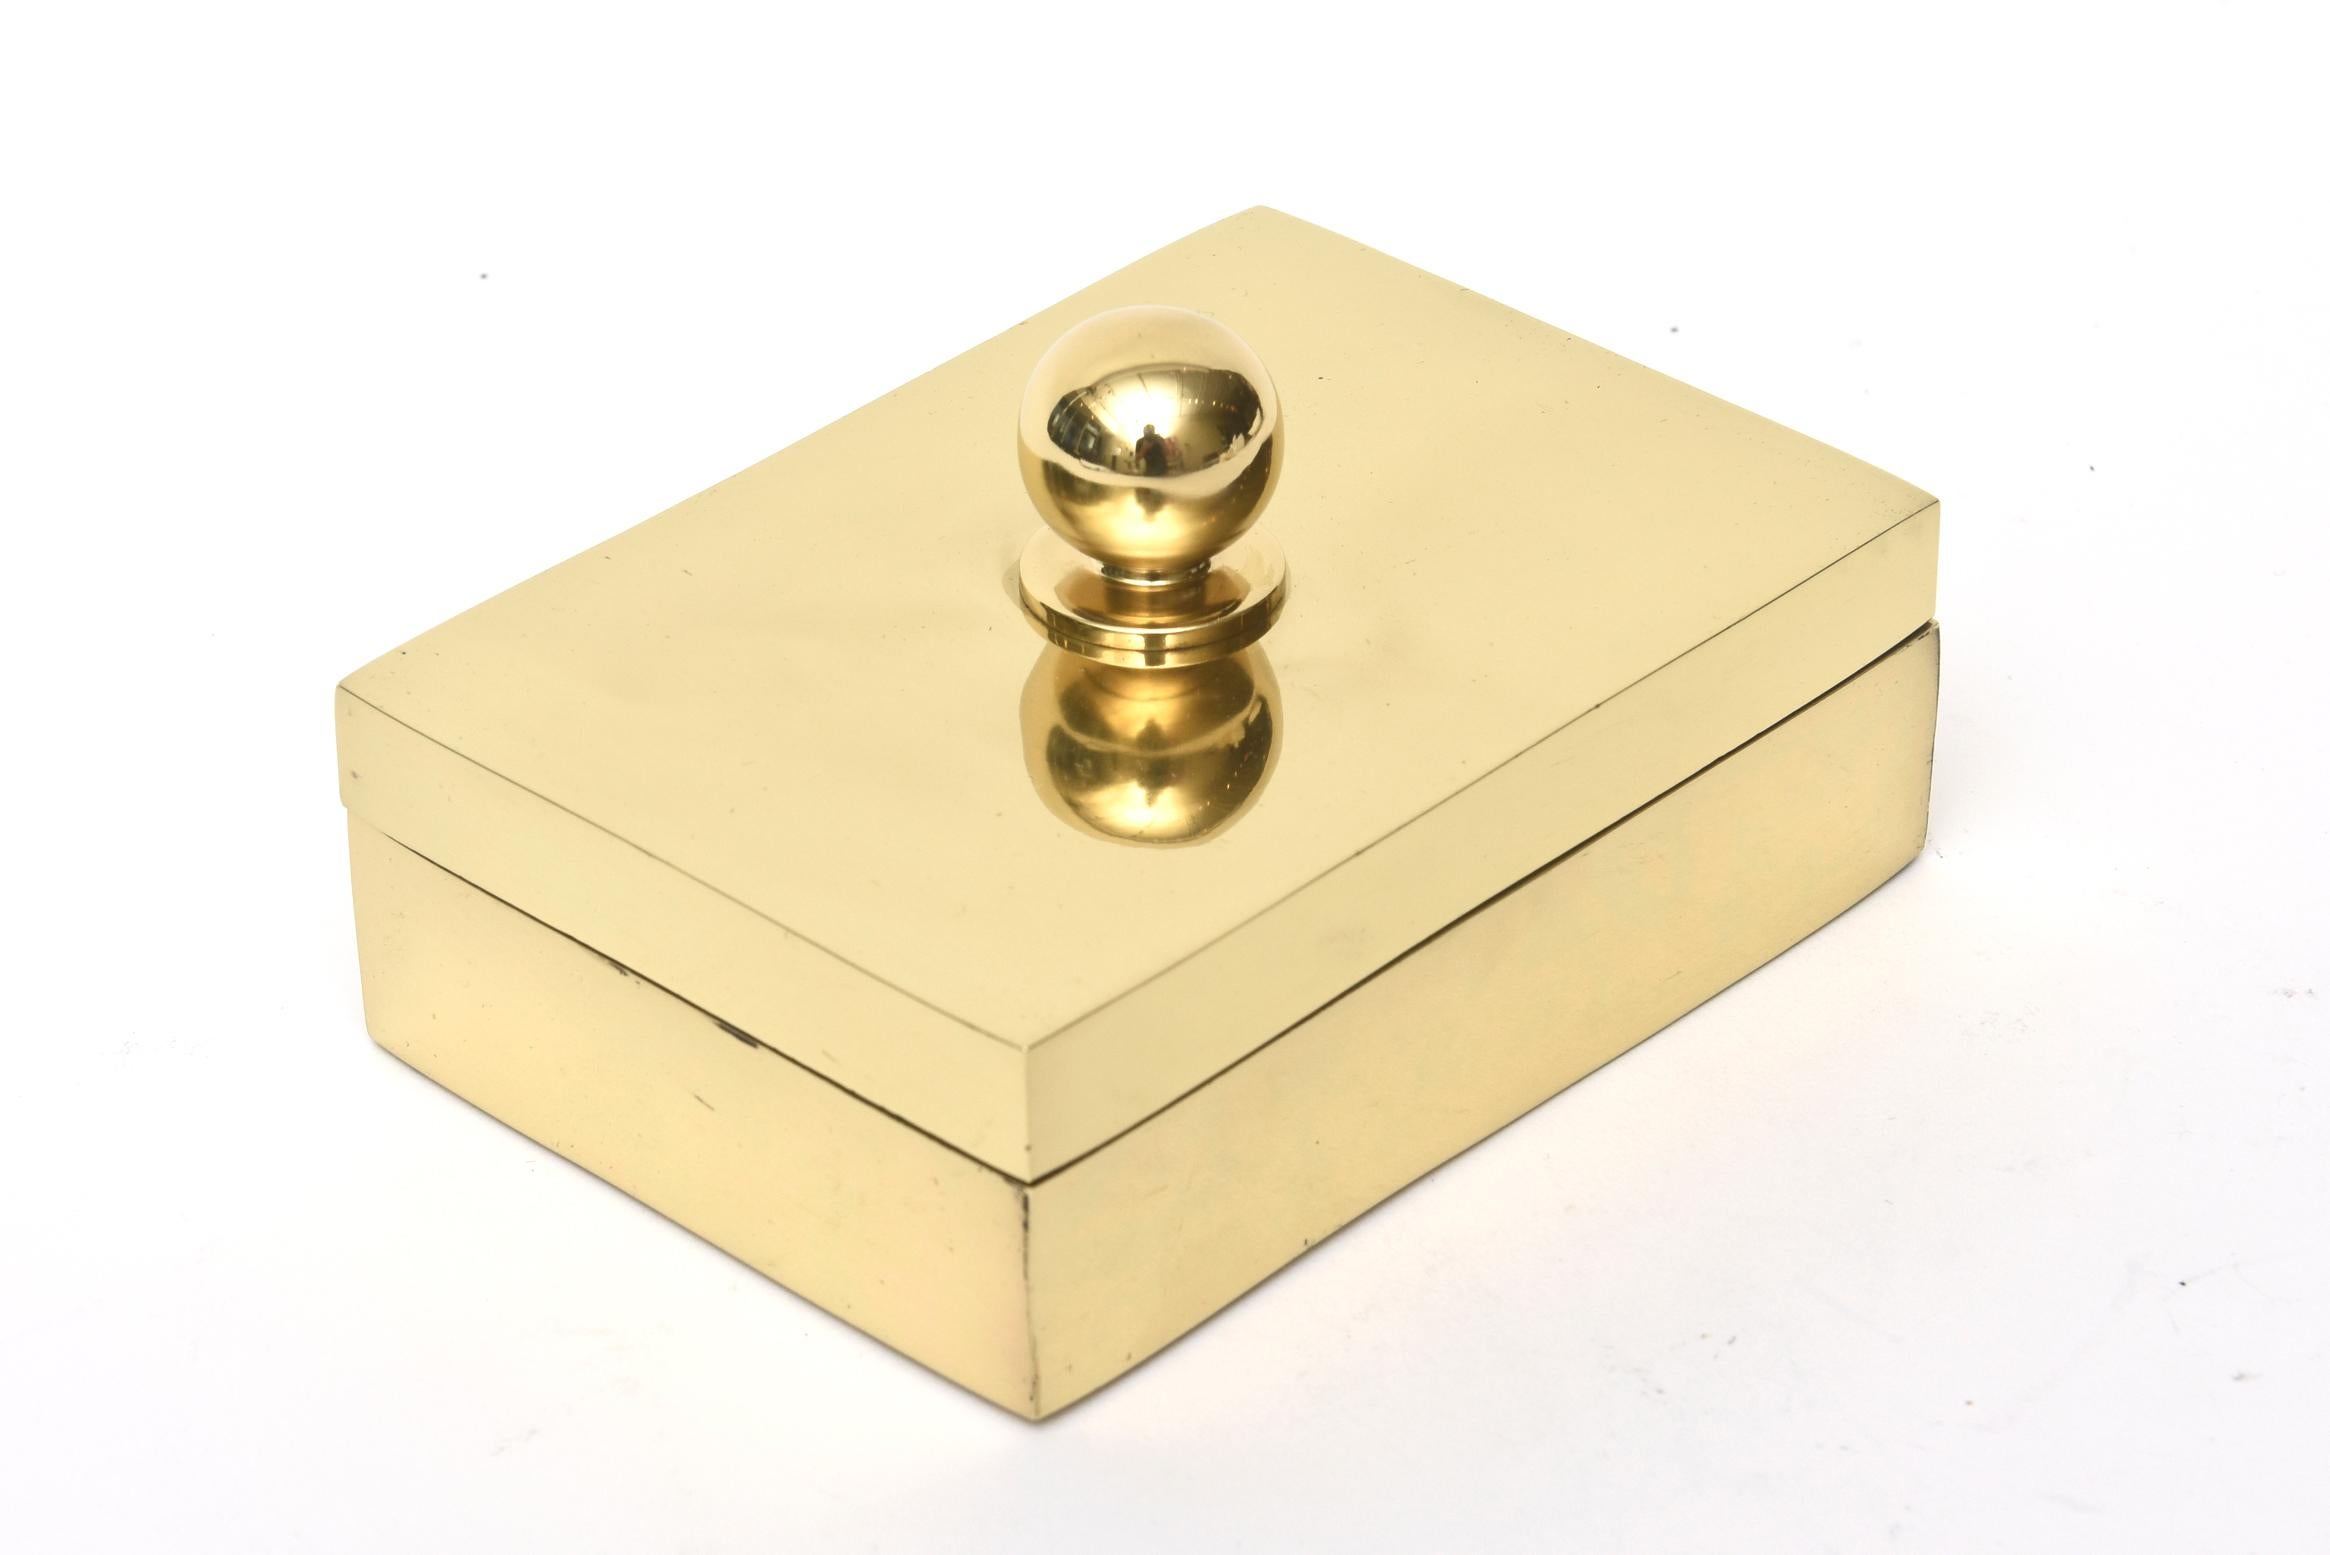 This lovely 2 part polished brass lidded box has a ball top. It is vintage from the 1970s and makes a great desk accessory or cocktail table addition. The lining is black velvet. It has been professionally polished. The old label on the bottom is